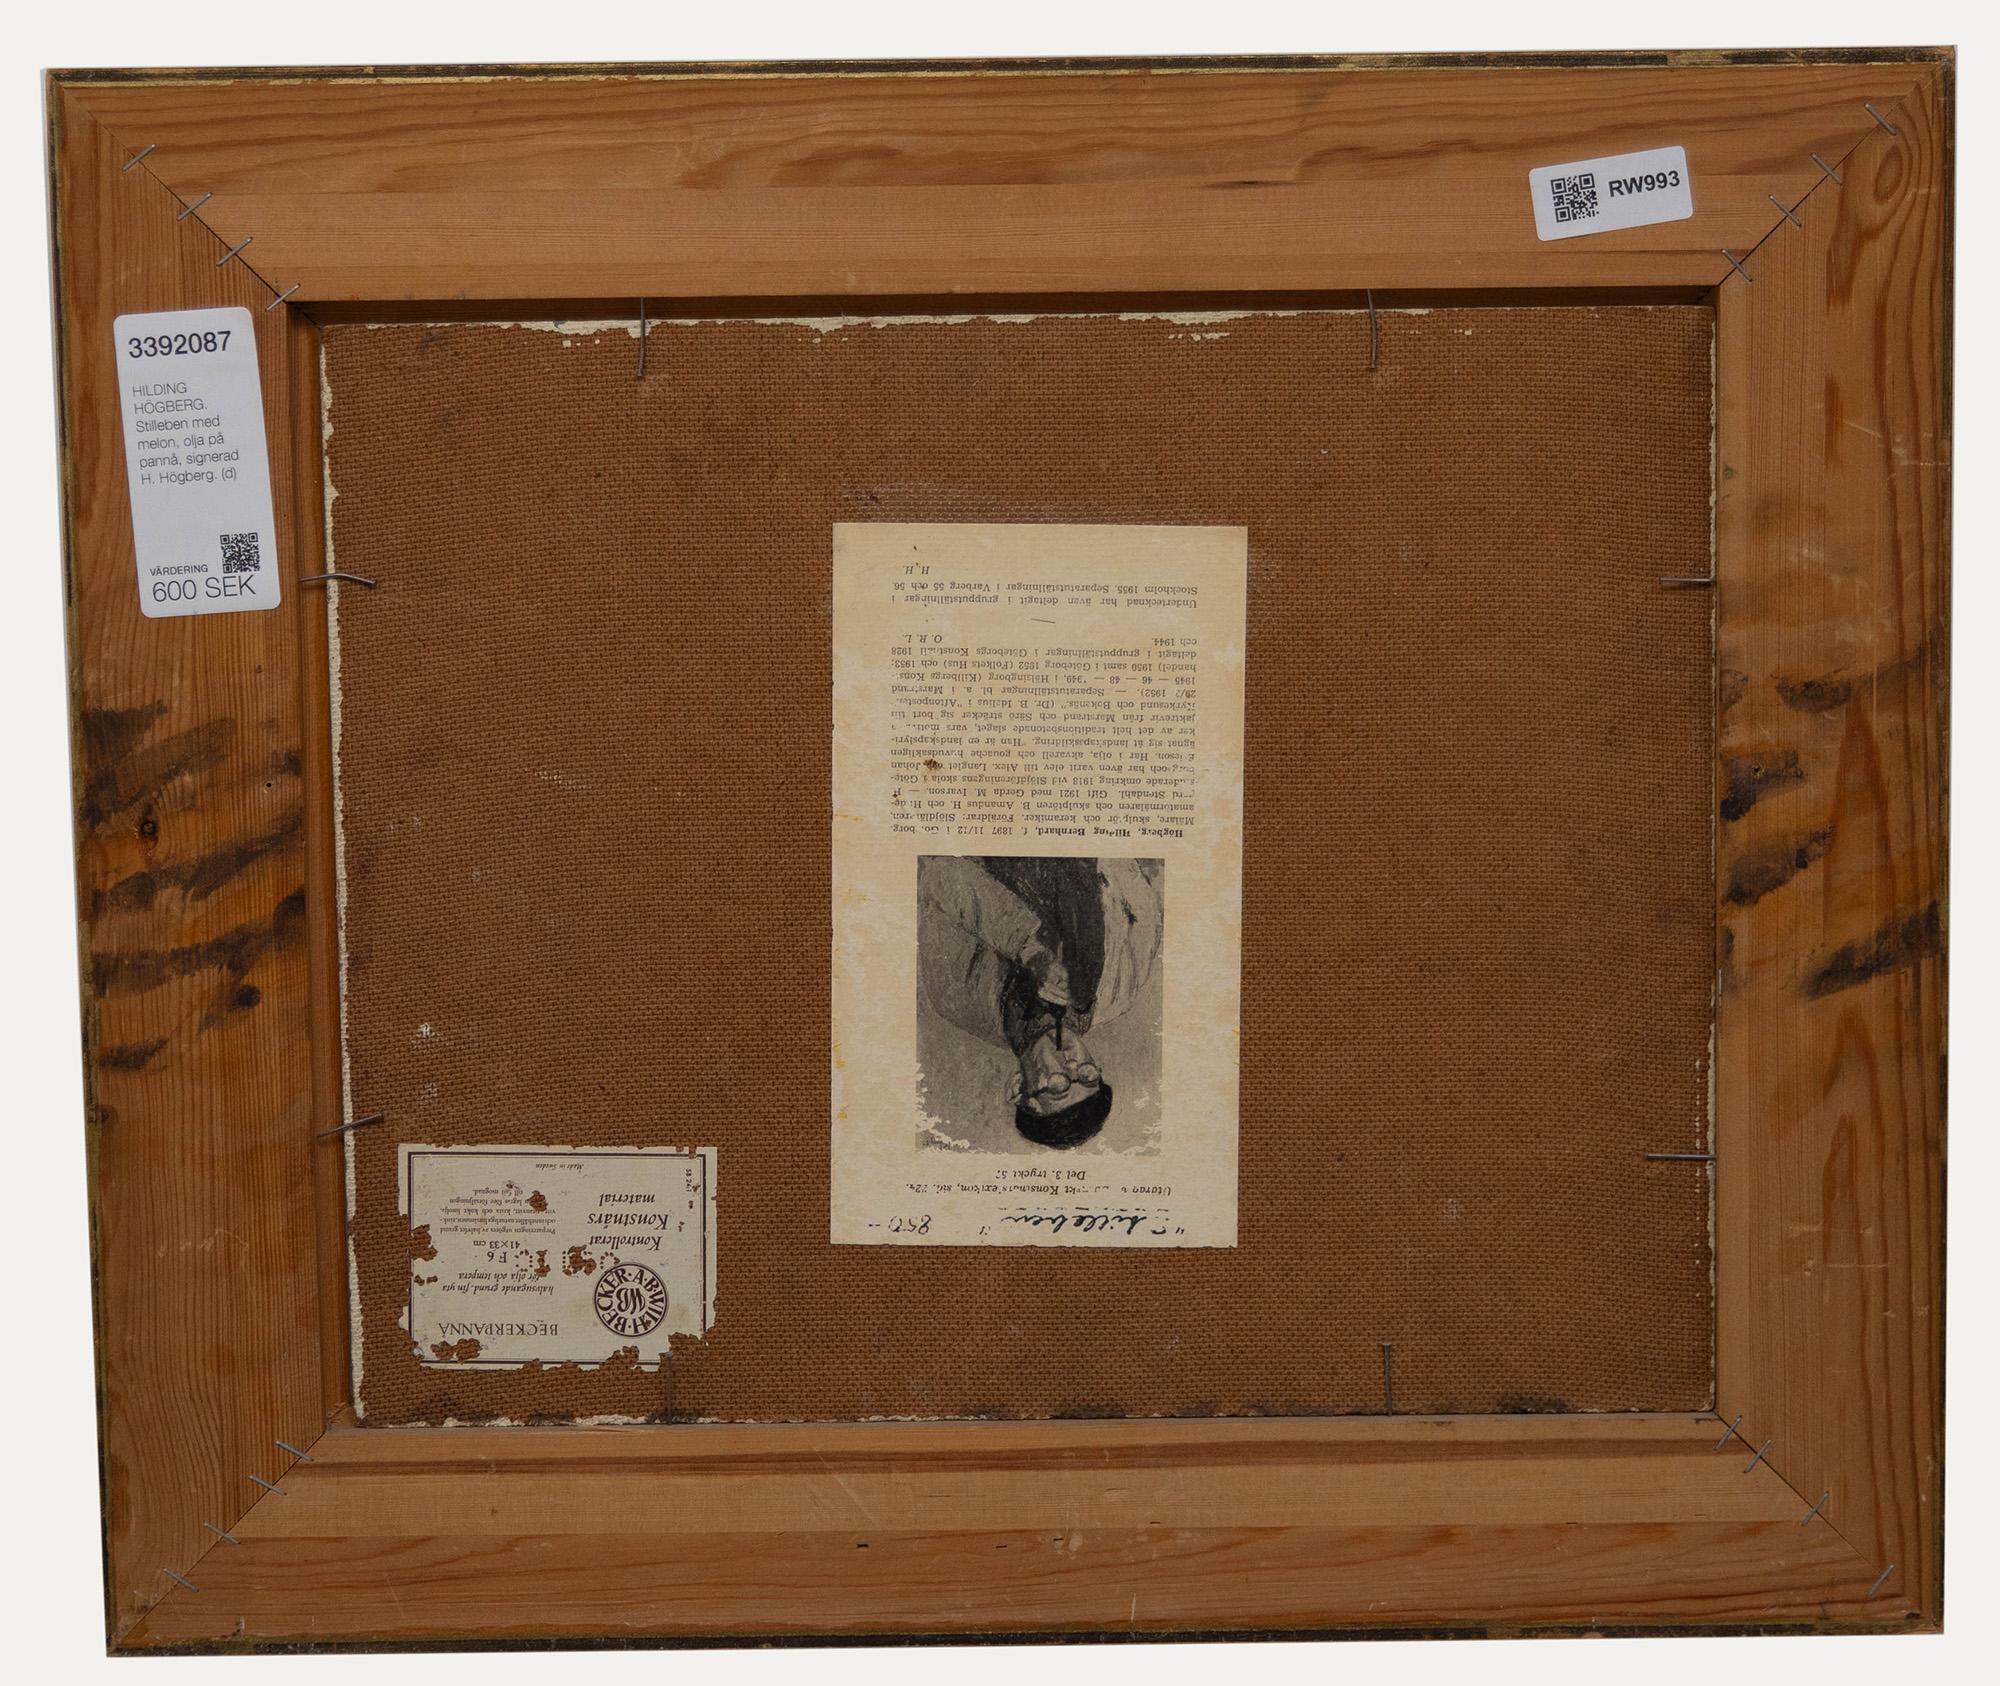 Signed to the lower right. Presented in a gilt frame. On board.